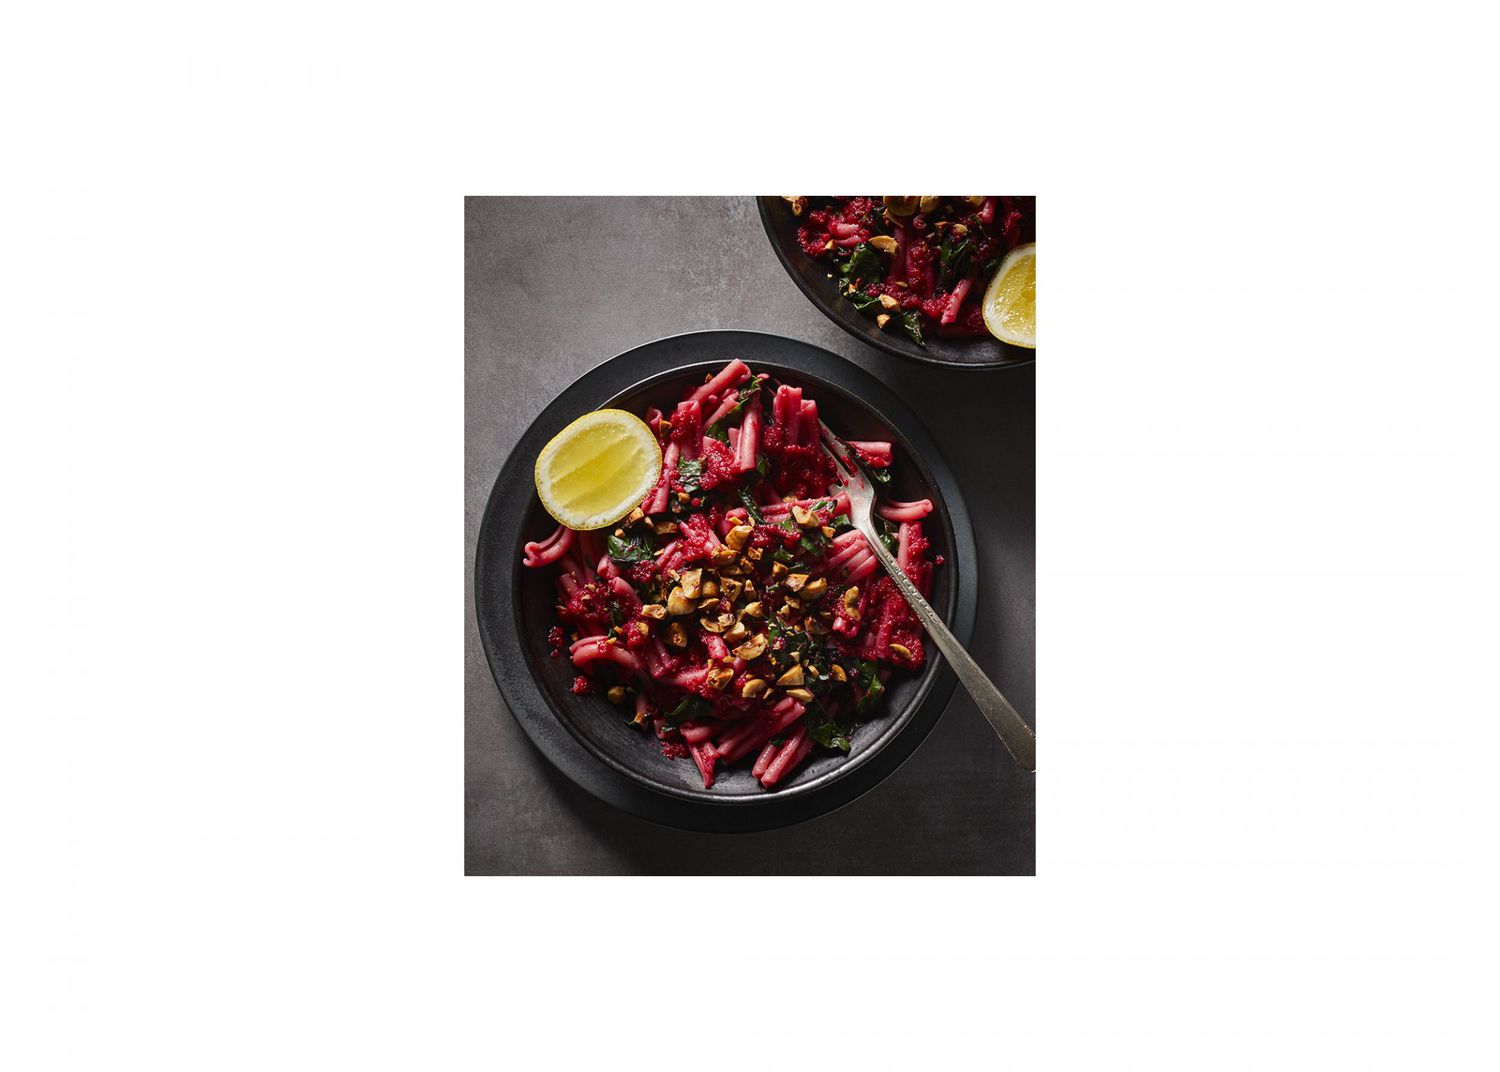 Beet Pasta With Hazelnuts and Beet Greens